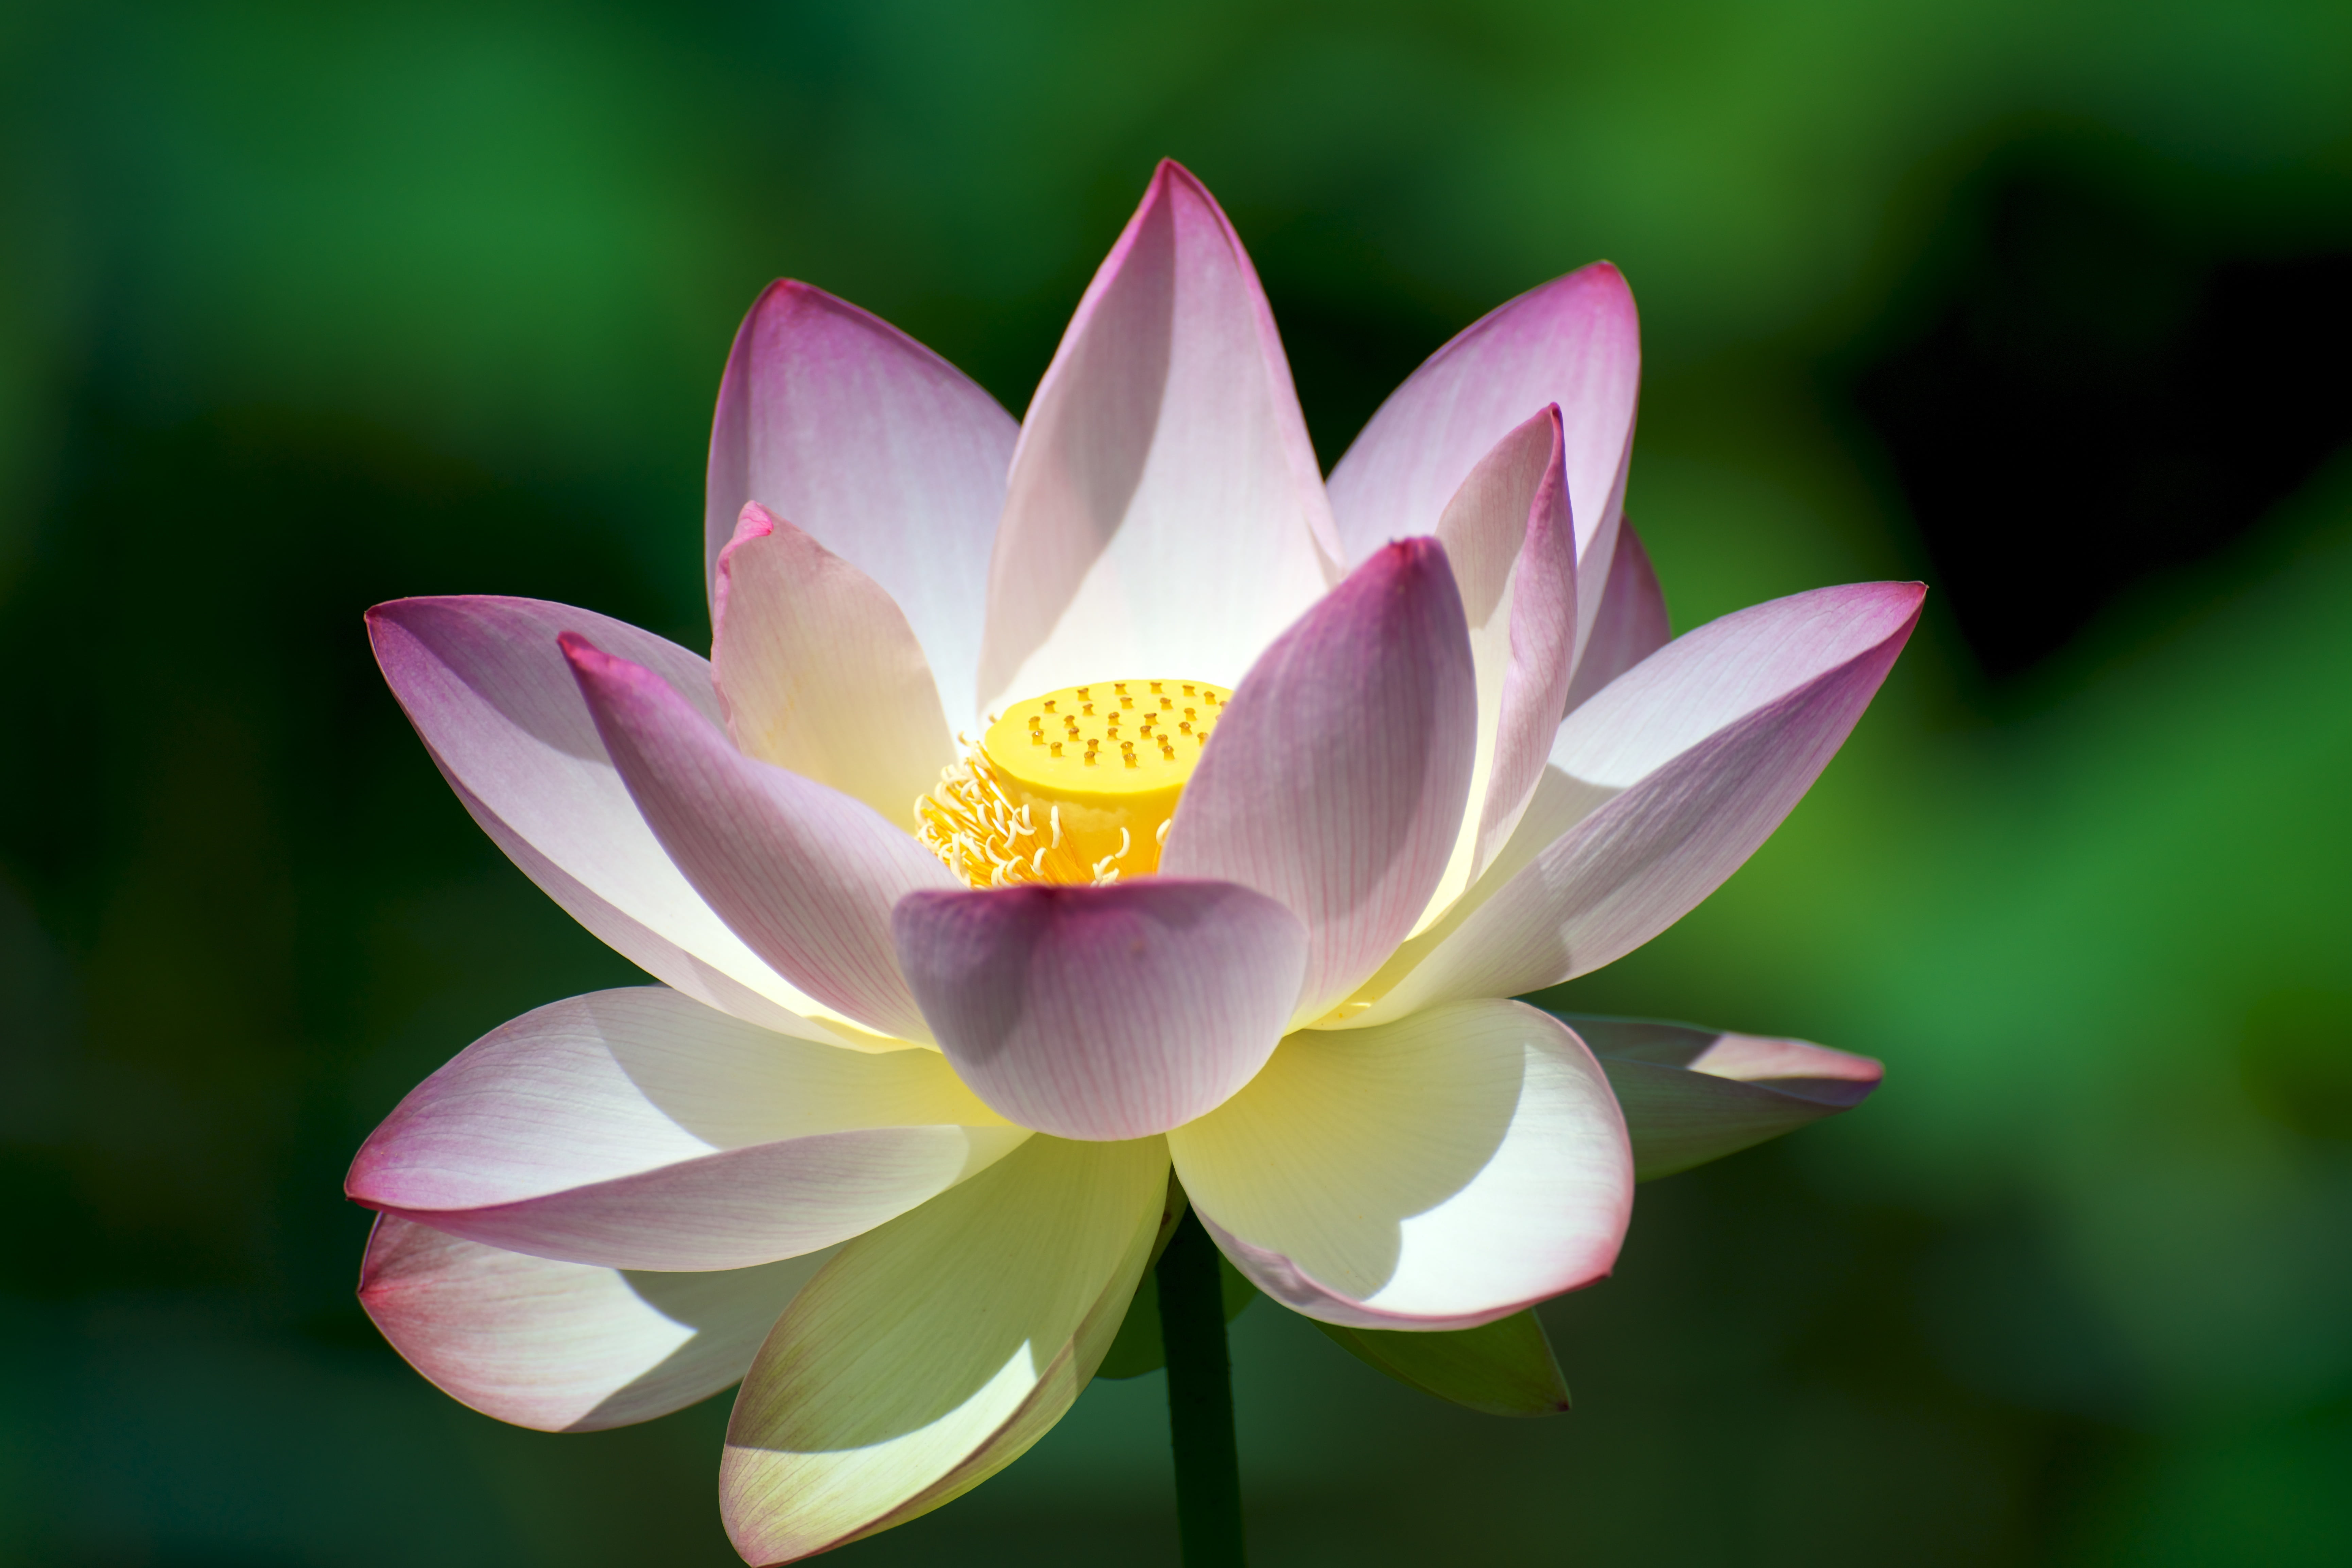 Closed up photo of white and pink Lotus flower, lotus blossom HD ...